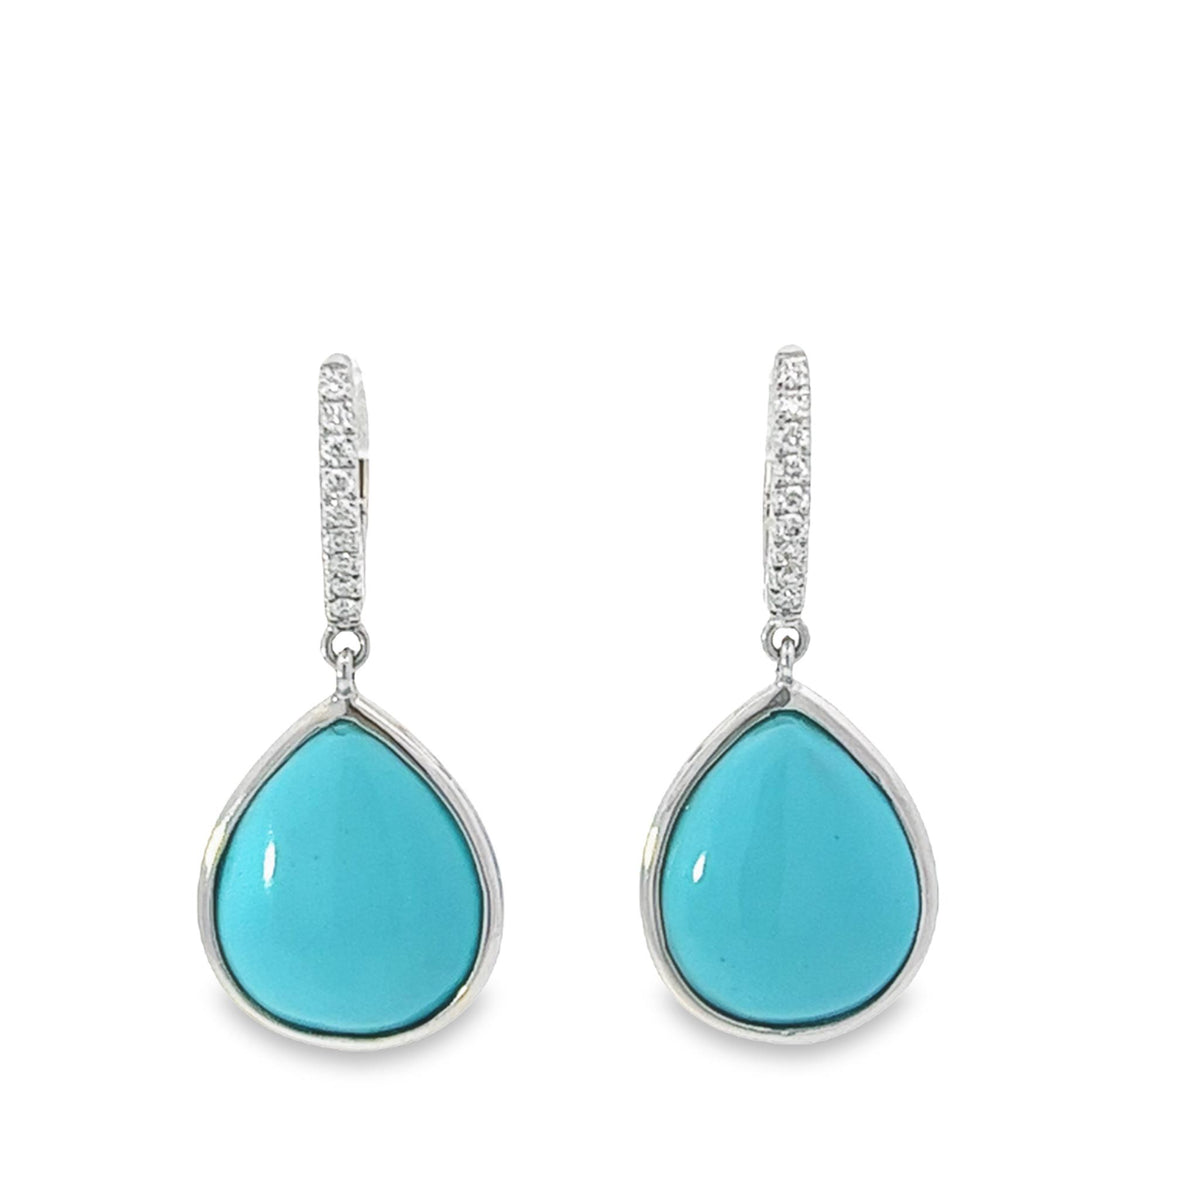 Frederic Sage 14Kt White Gold Luna Dangle Earrings With 5.04ct Turquoise